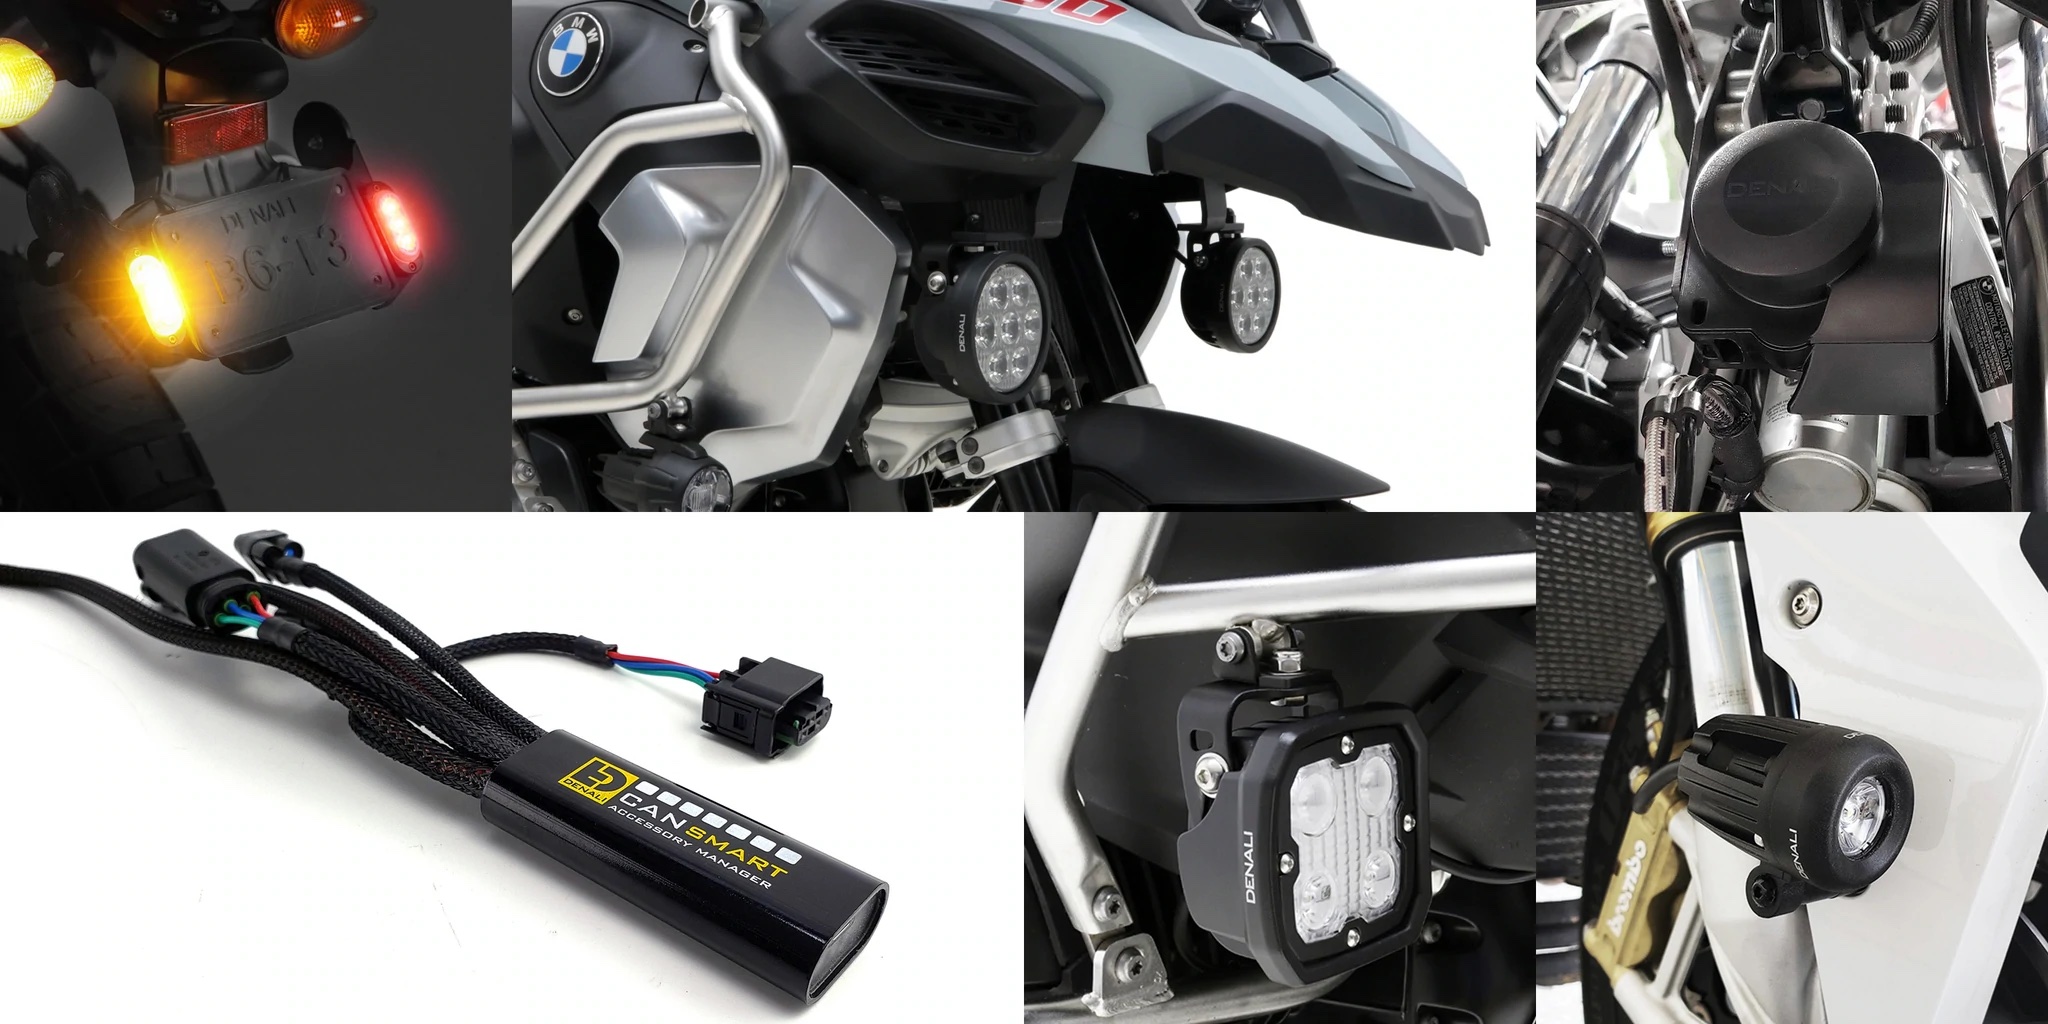 BMW_R1250GSA_Outfitting_Collage_2048x2048